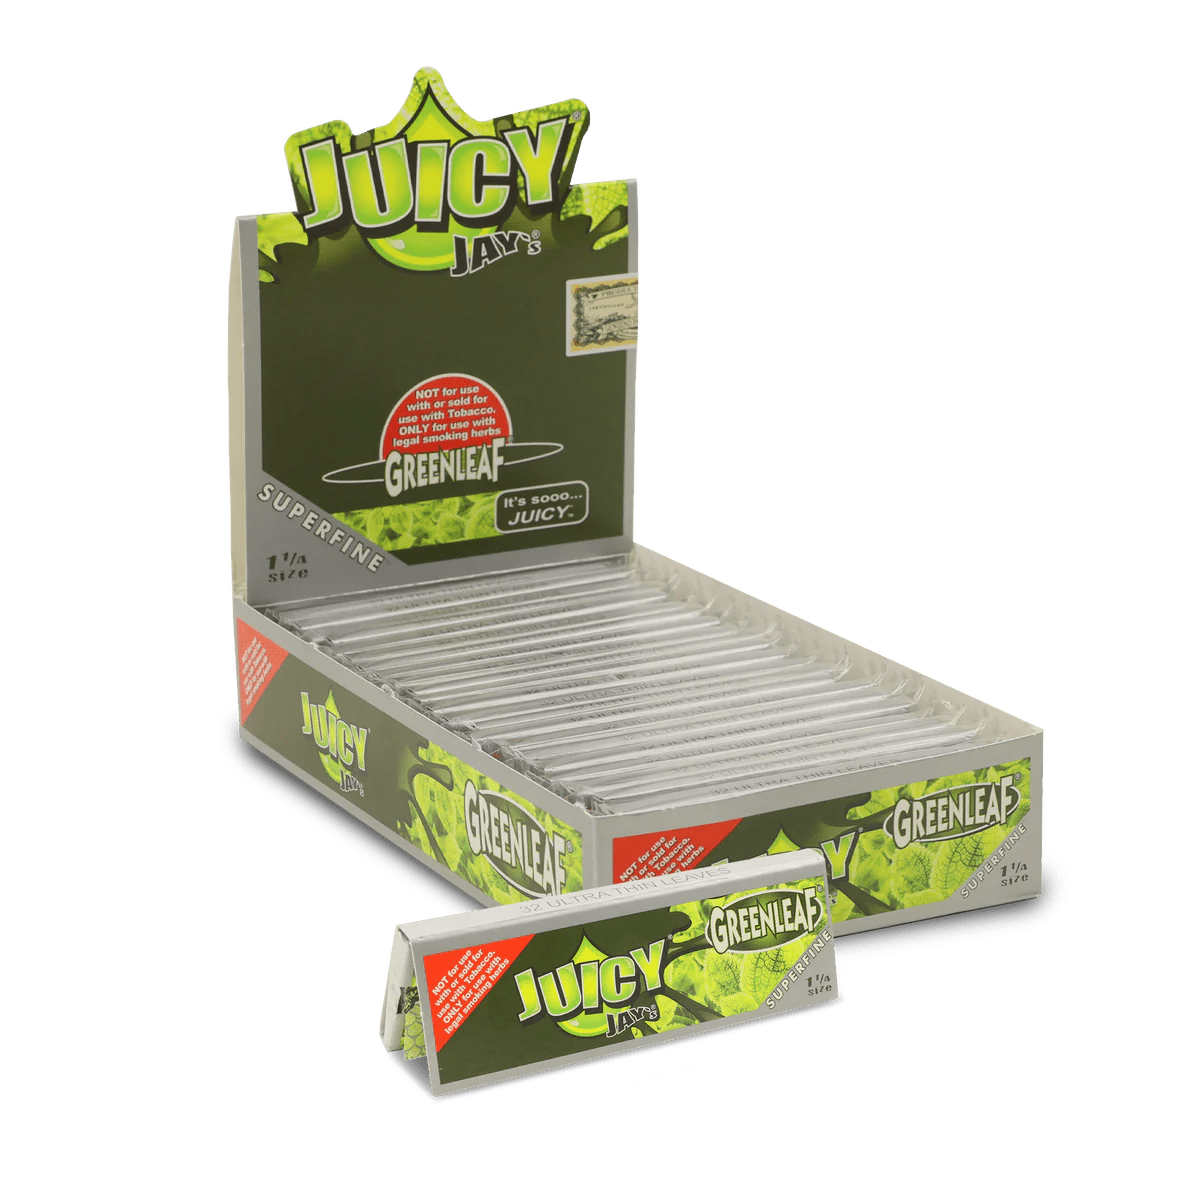 Juicy Jay Rolling Paper Green Leaf / Box of 24 Super Fine Rolling Papers